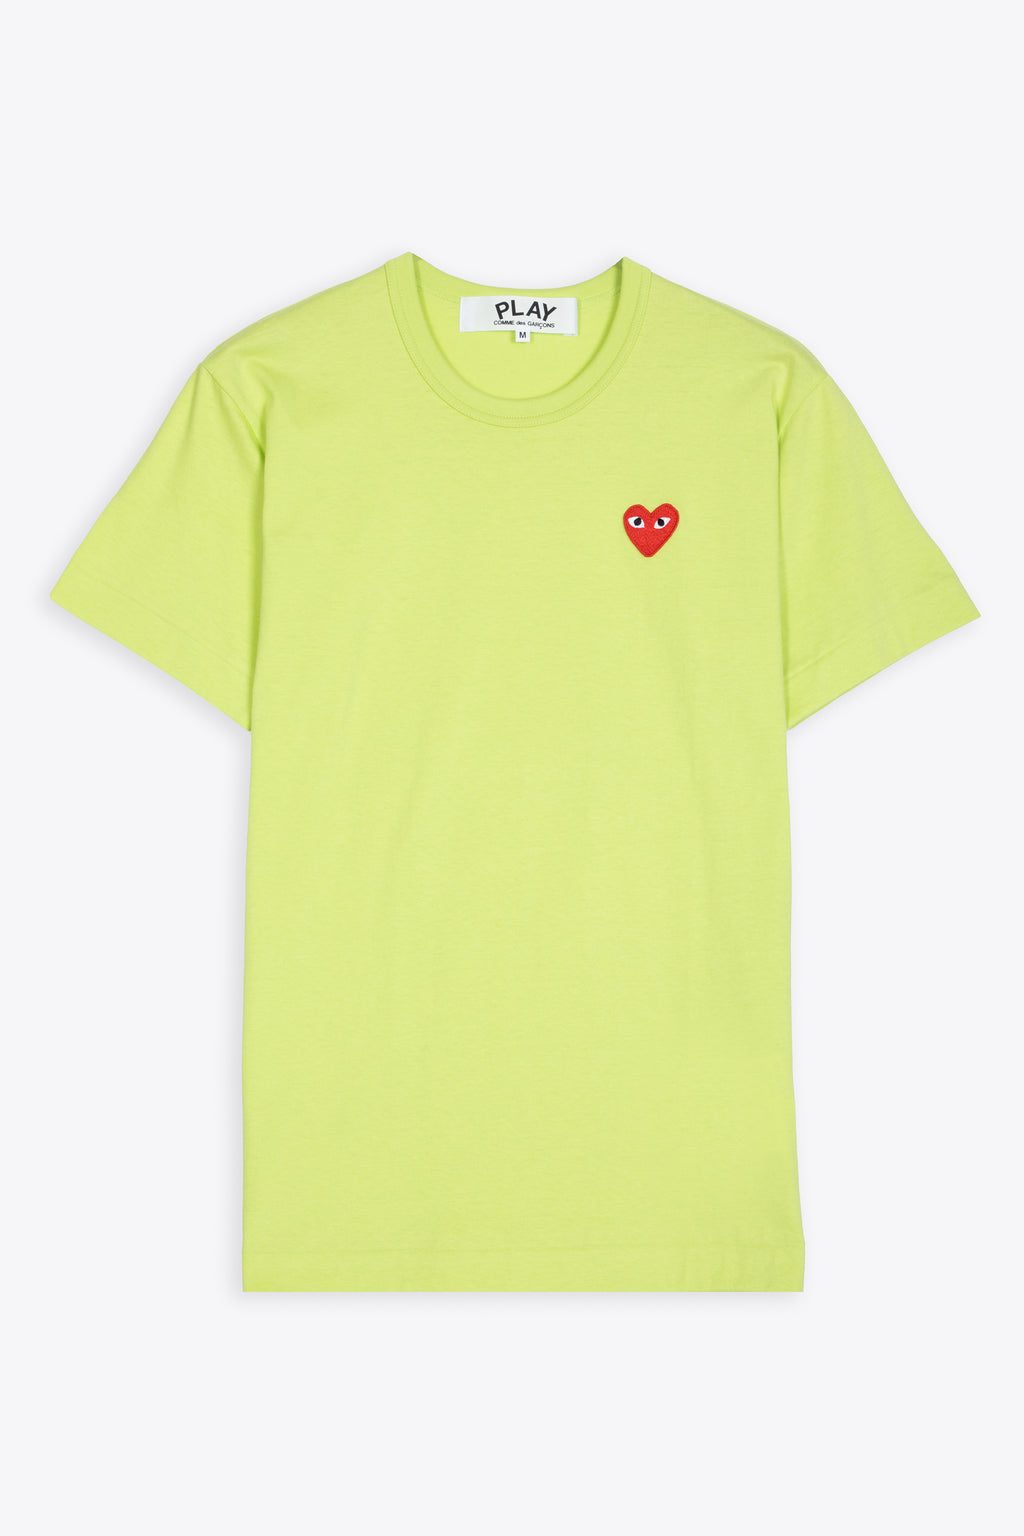 alt-image__Lime-green-t-shirt-with-big-heart-patch